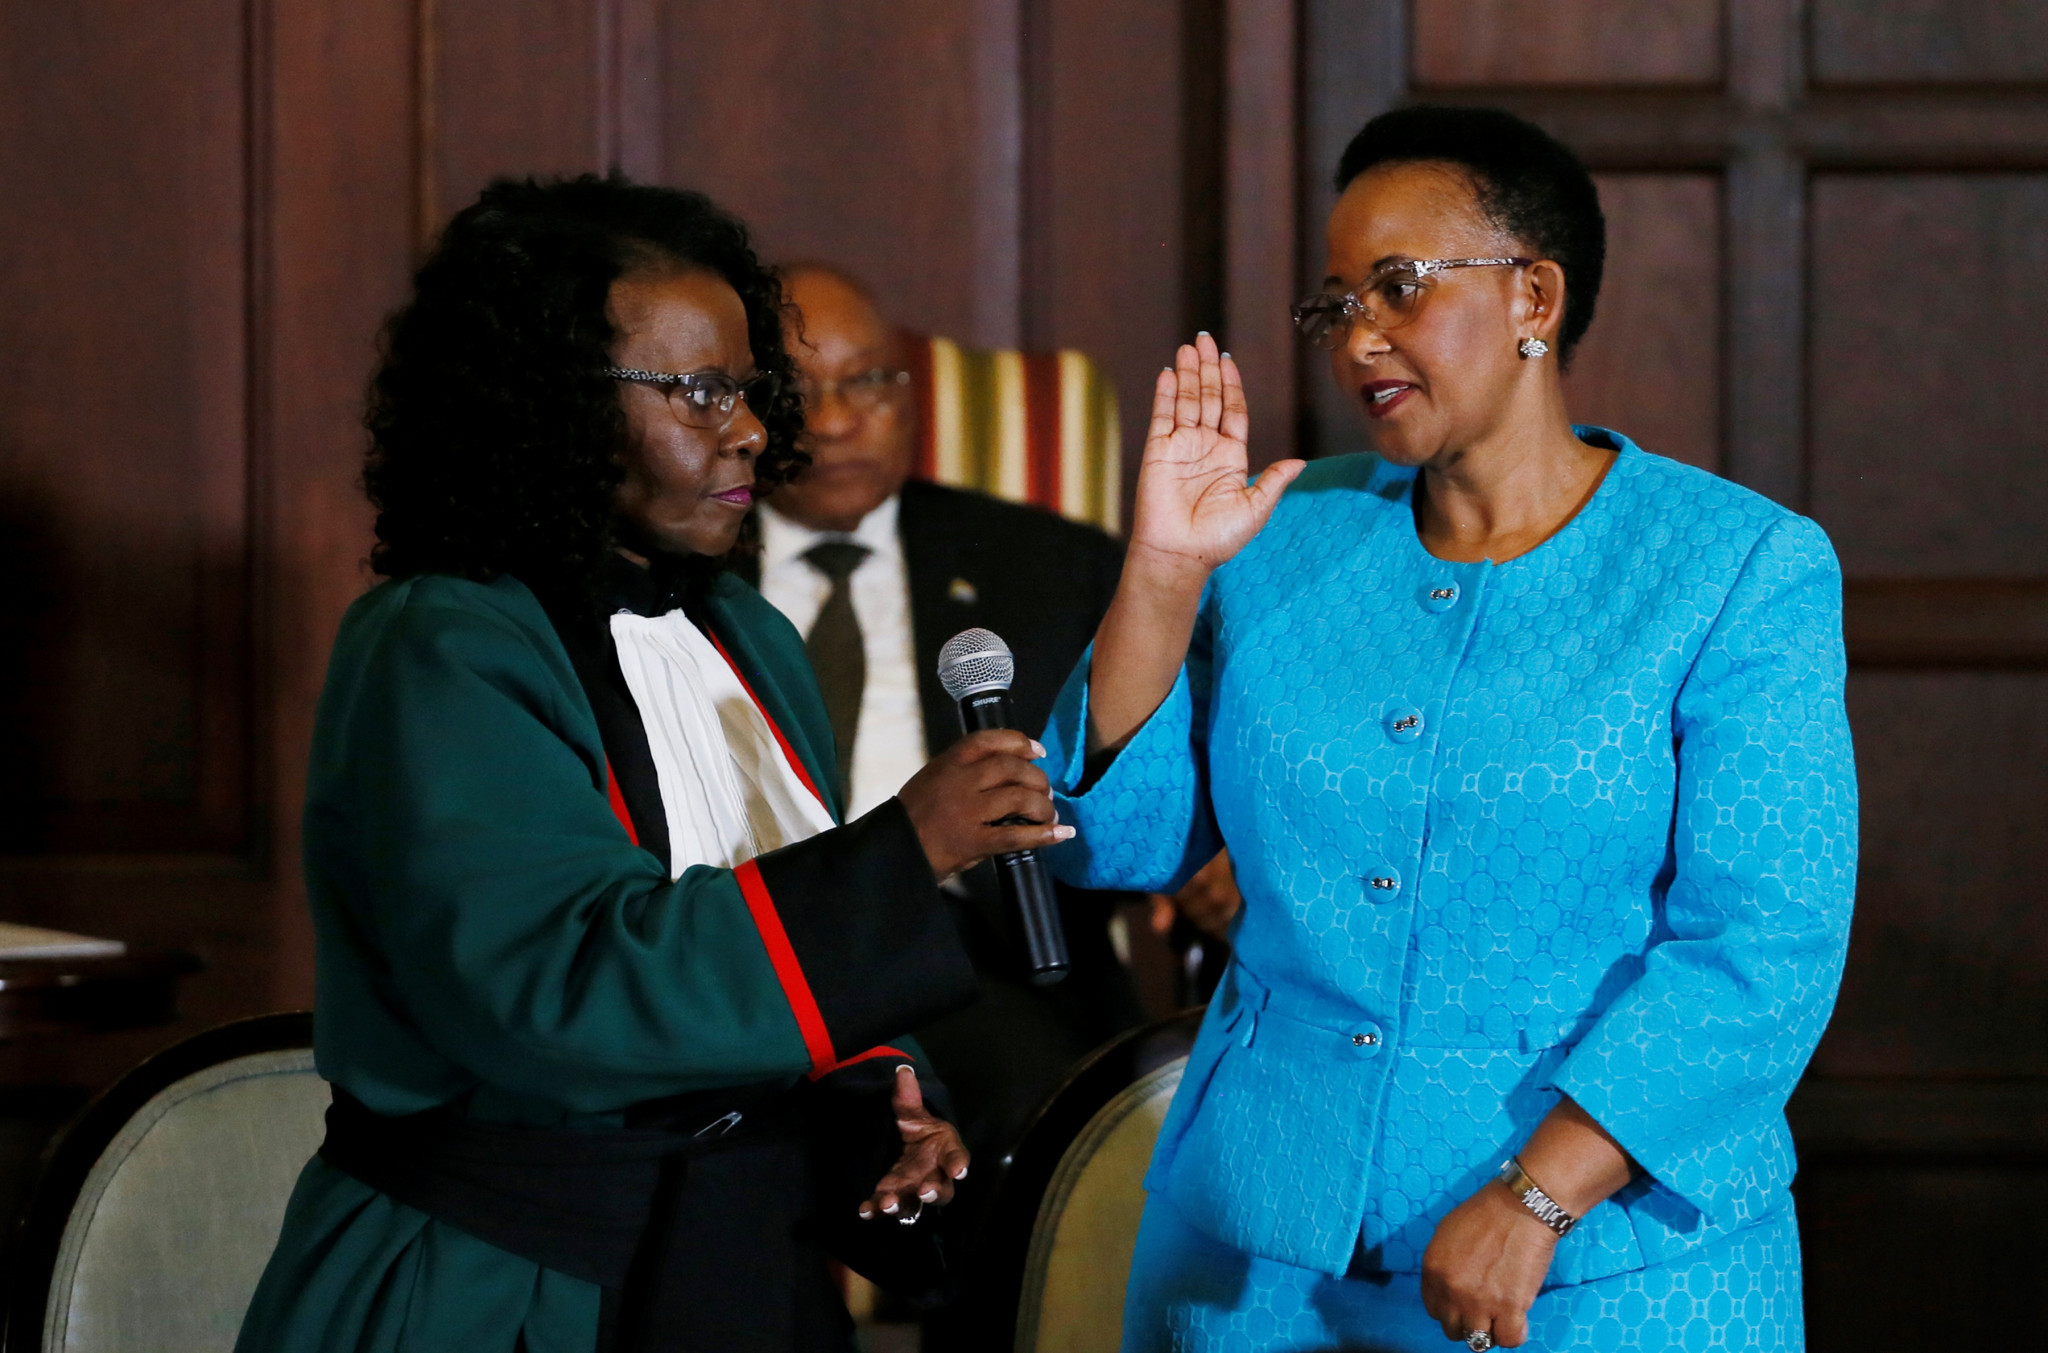 South Africa's Sports Minister Tokozile Xasa, right, has called the IAAF's proposed rule on hyperandrogenism a human rights violation ©Getty Images